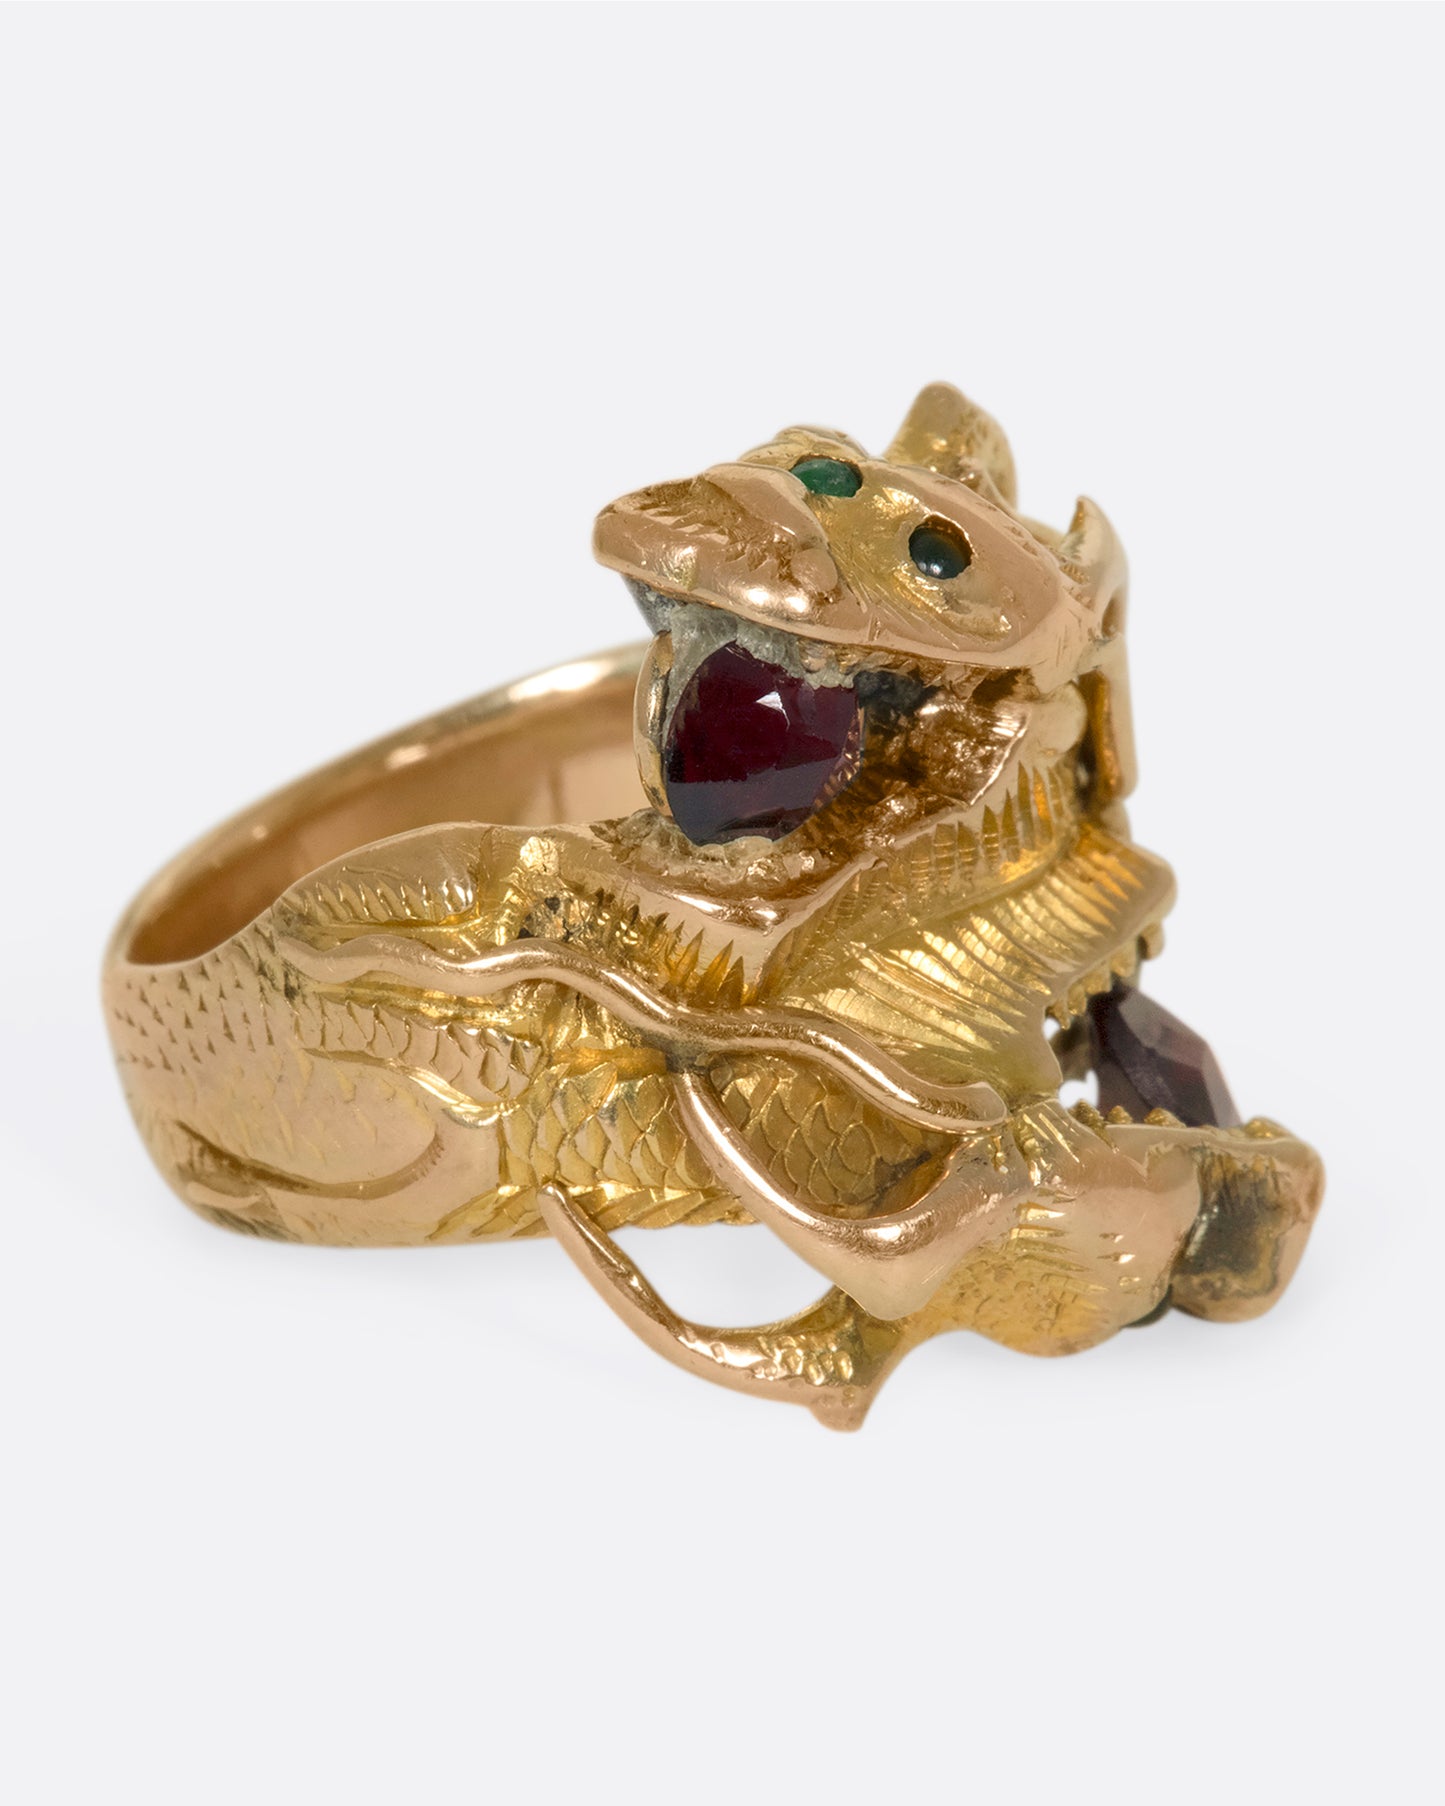 A right side view of a yellow gold ring with two wrapped dragons, each with emerald eyes and garnets in their mouths.